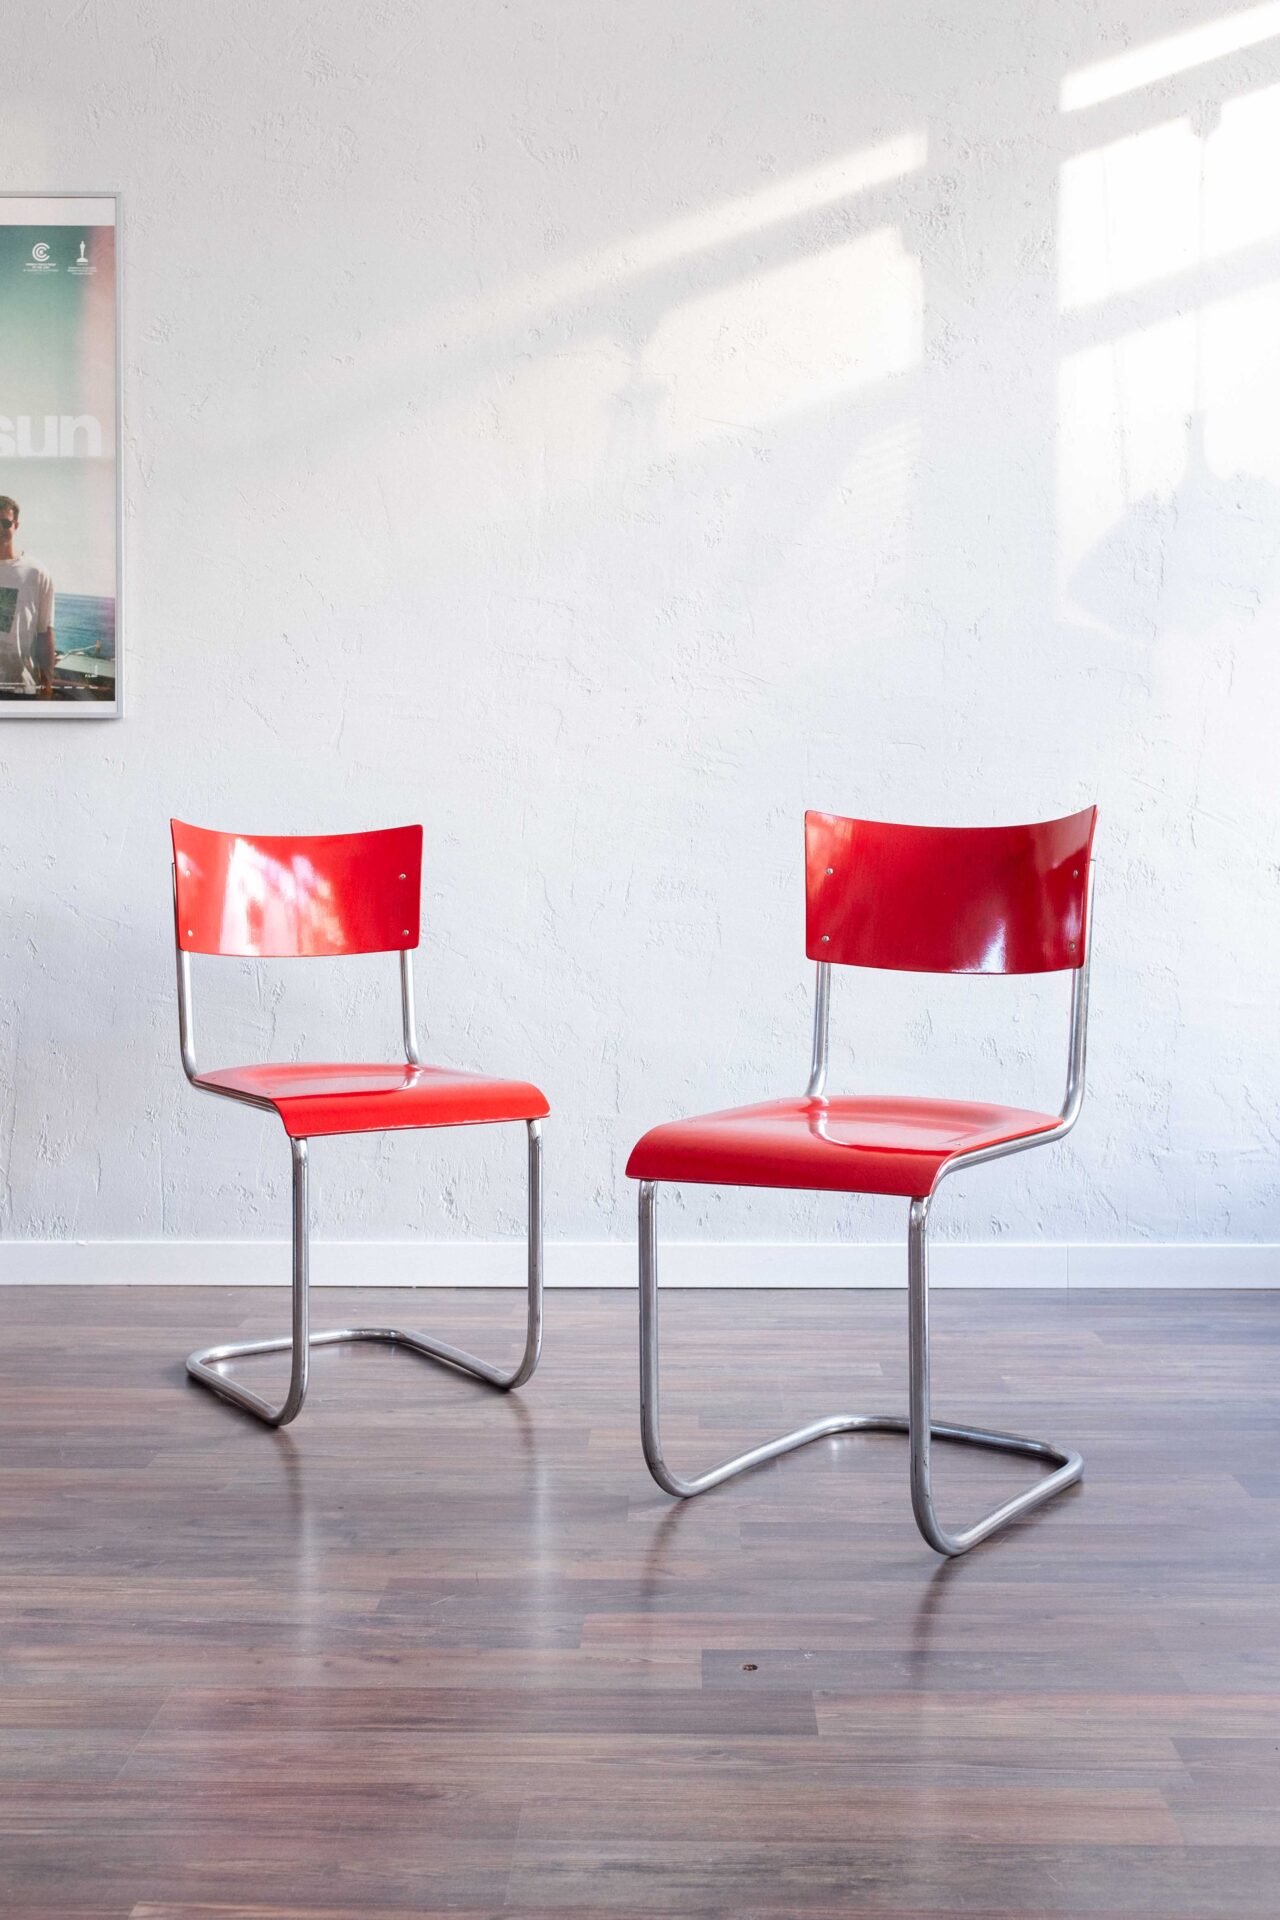 Functionalist Red Chrome Chairs